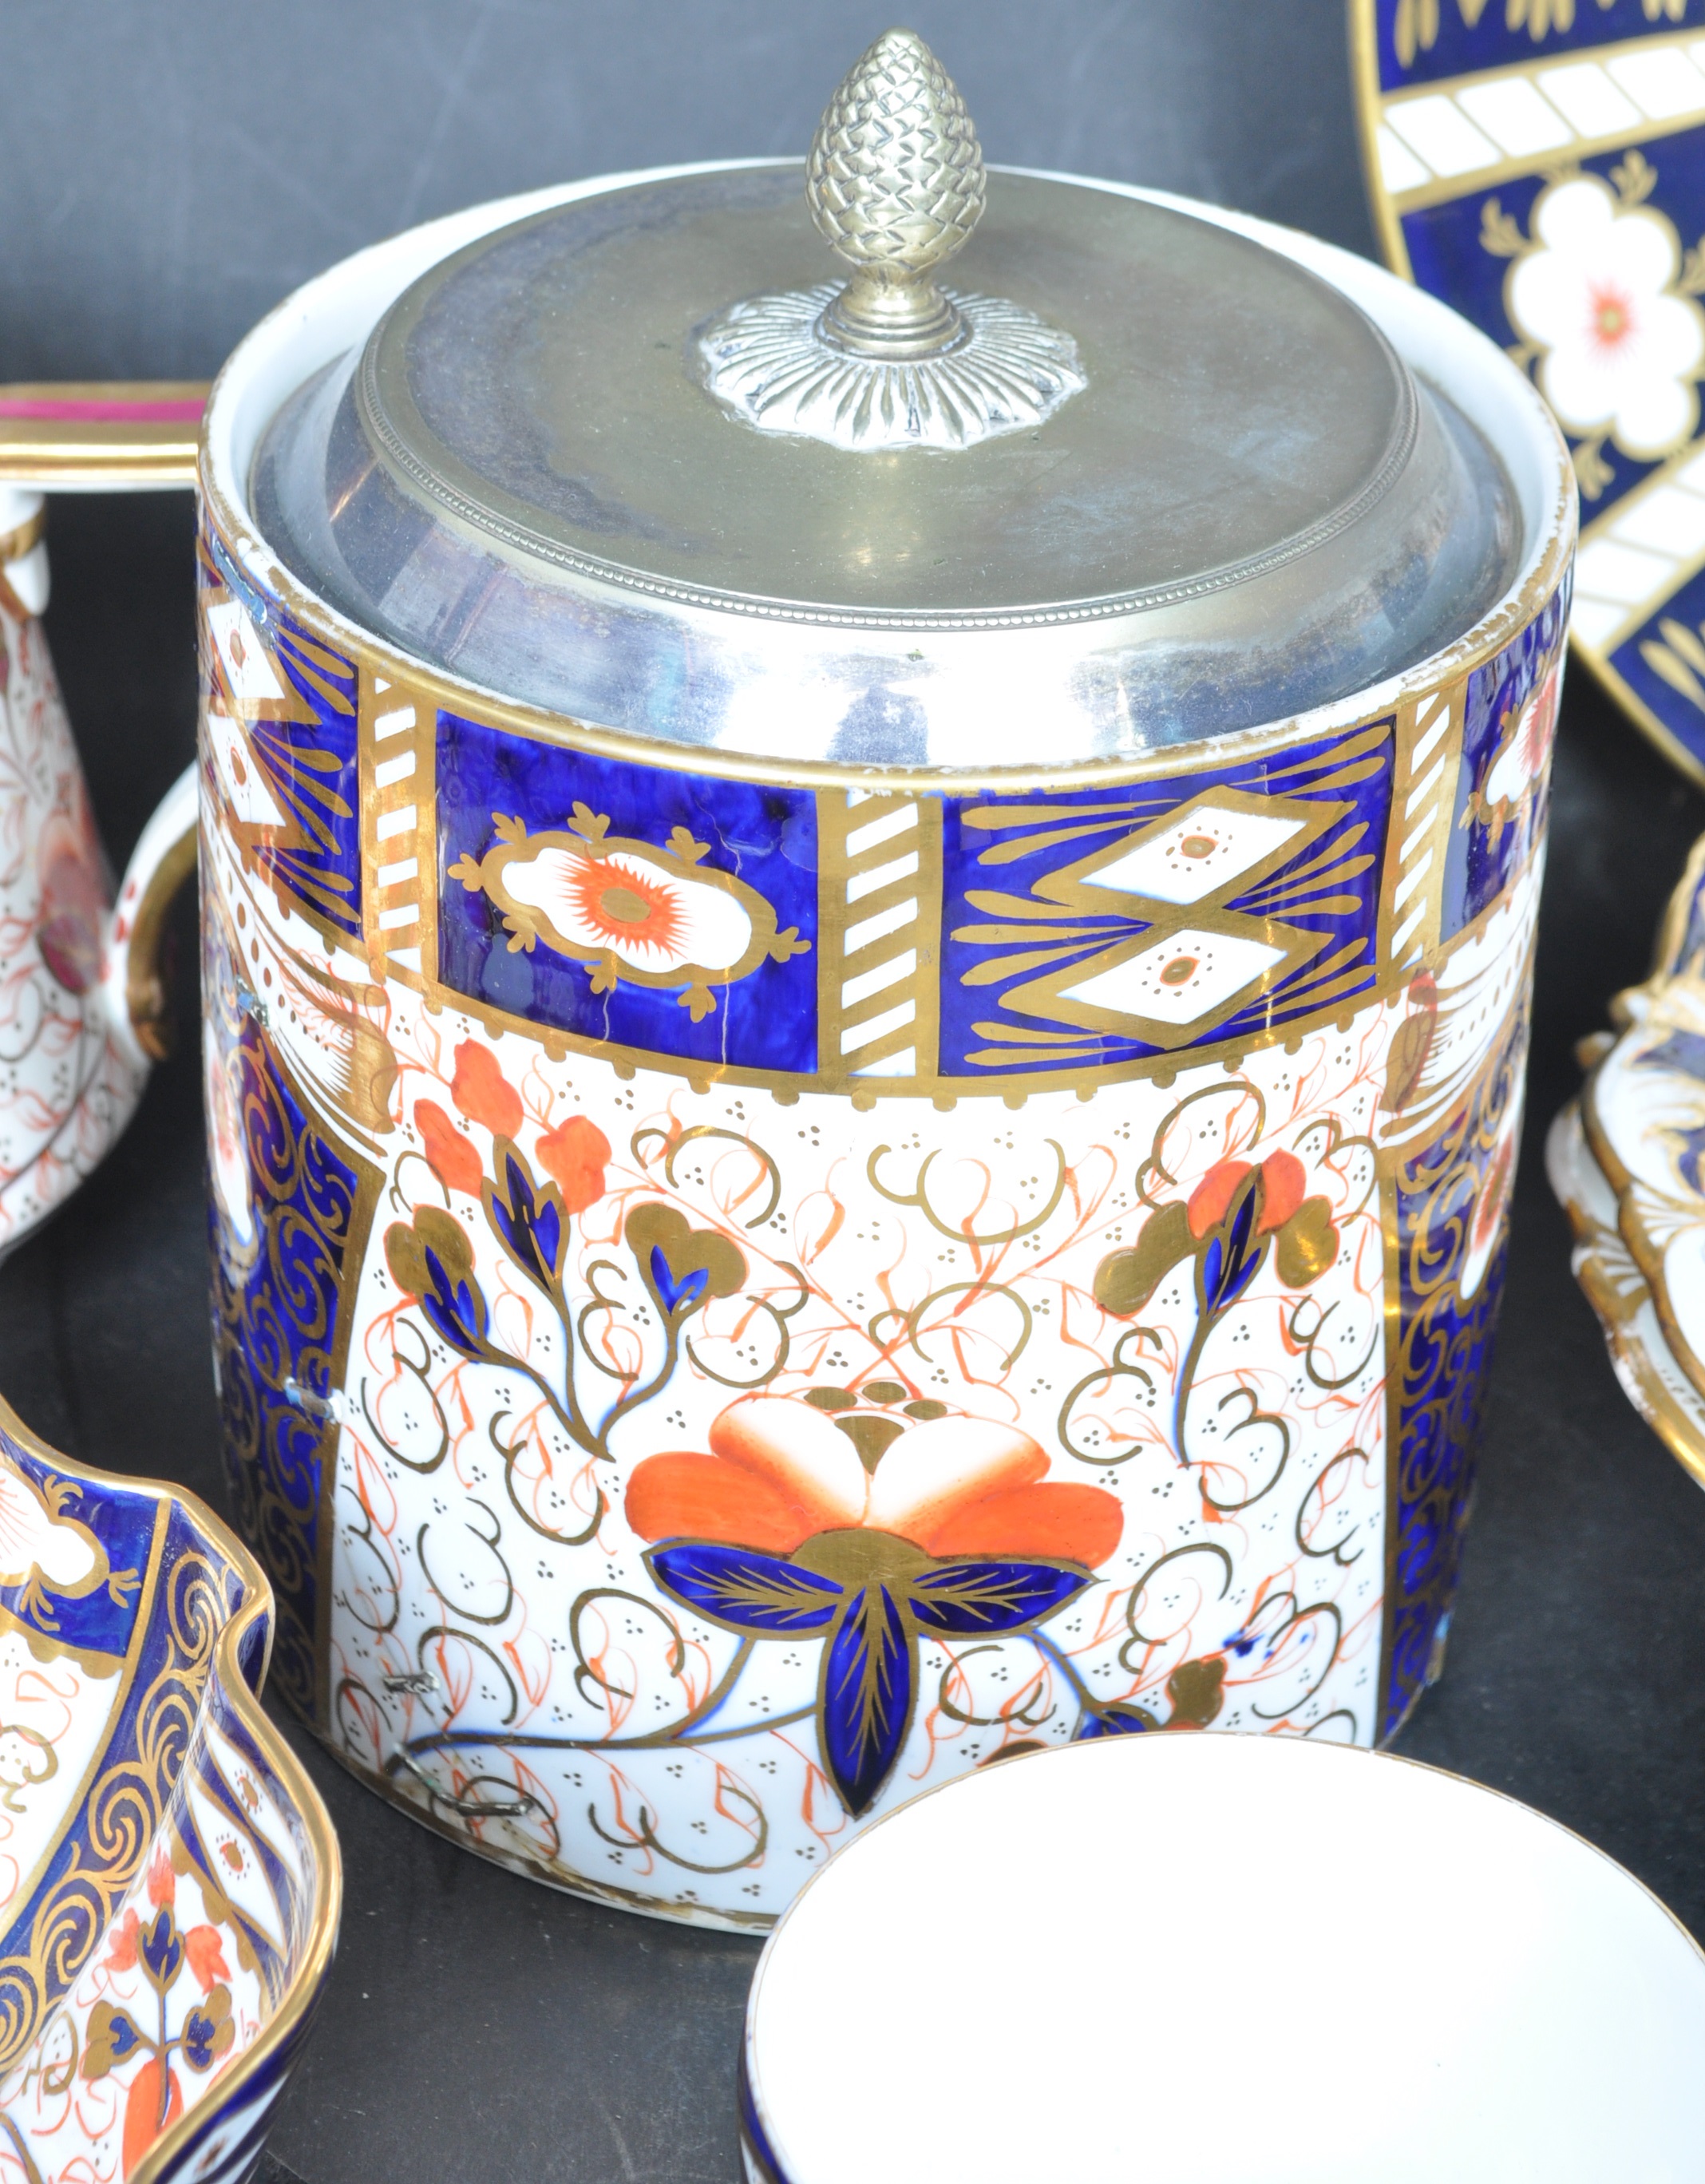 COLLECTION OF VINTAGE 20TH CENTURY ROYQL CROWN DERBY IMARI PATTERN CHINA AND MORE - Image 5 of 14